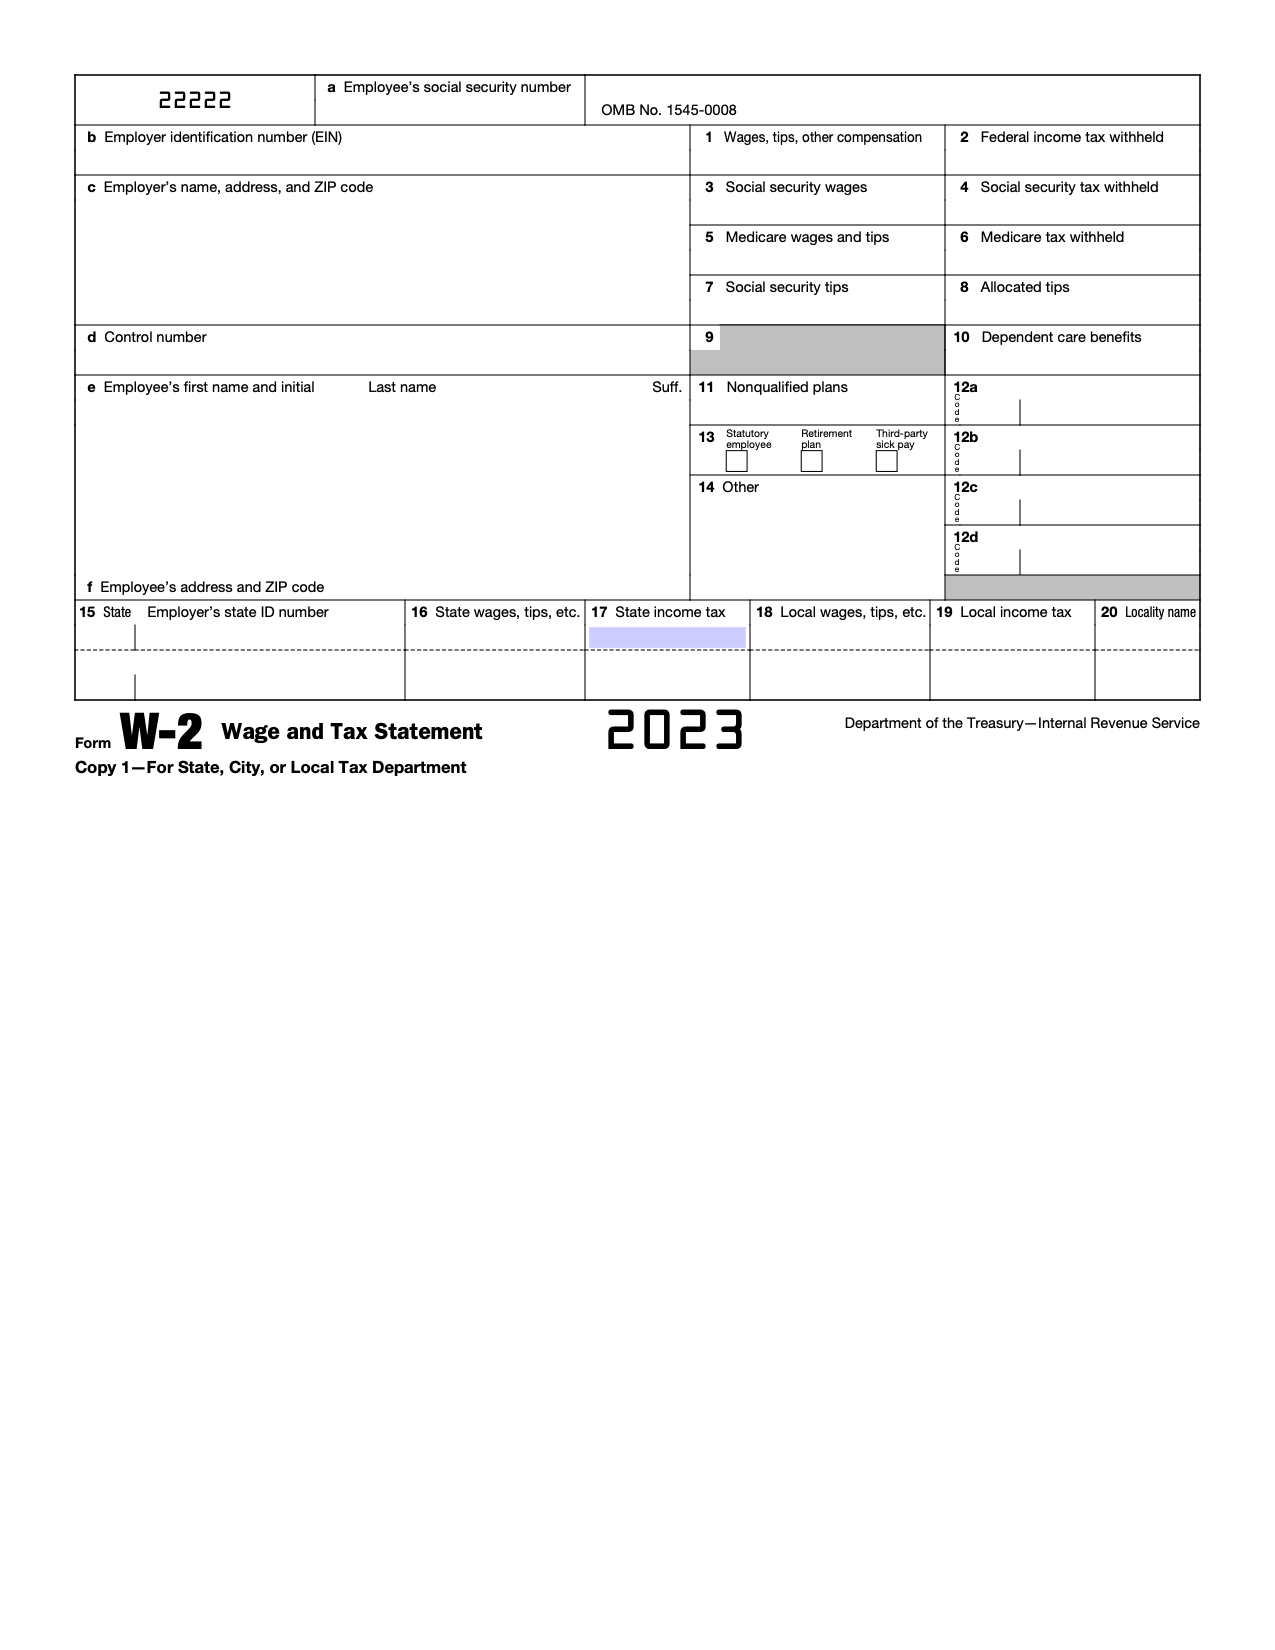 Free Irs Form W-2 | Wage And Tax Statement - Pdf – Eforms inside W2 Forms 2022 Printable